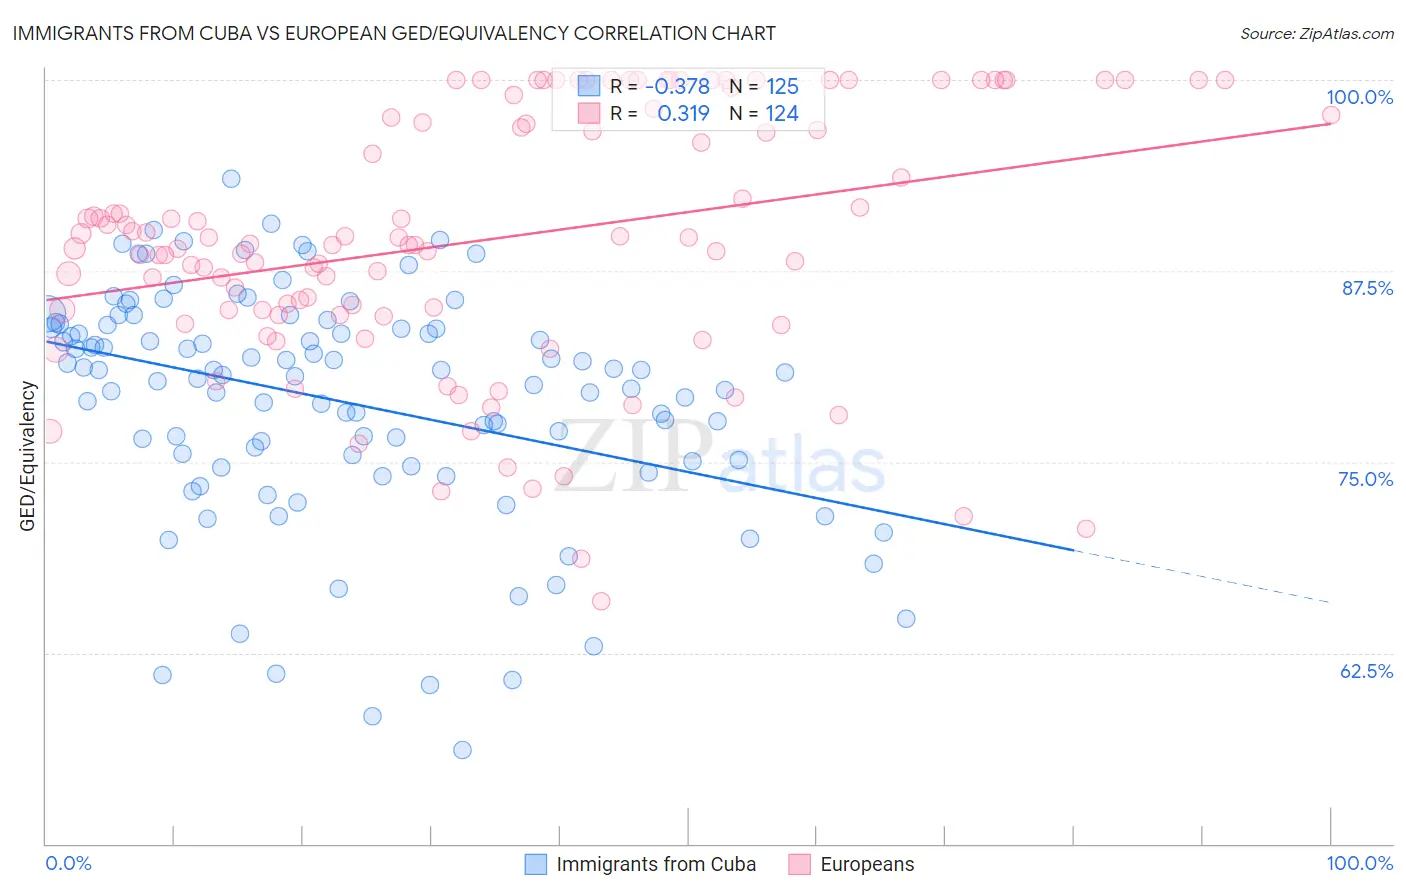 Immigrants from Cuba vs European GED/Equivalency